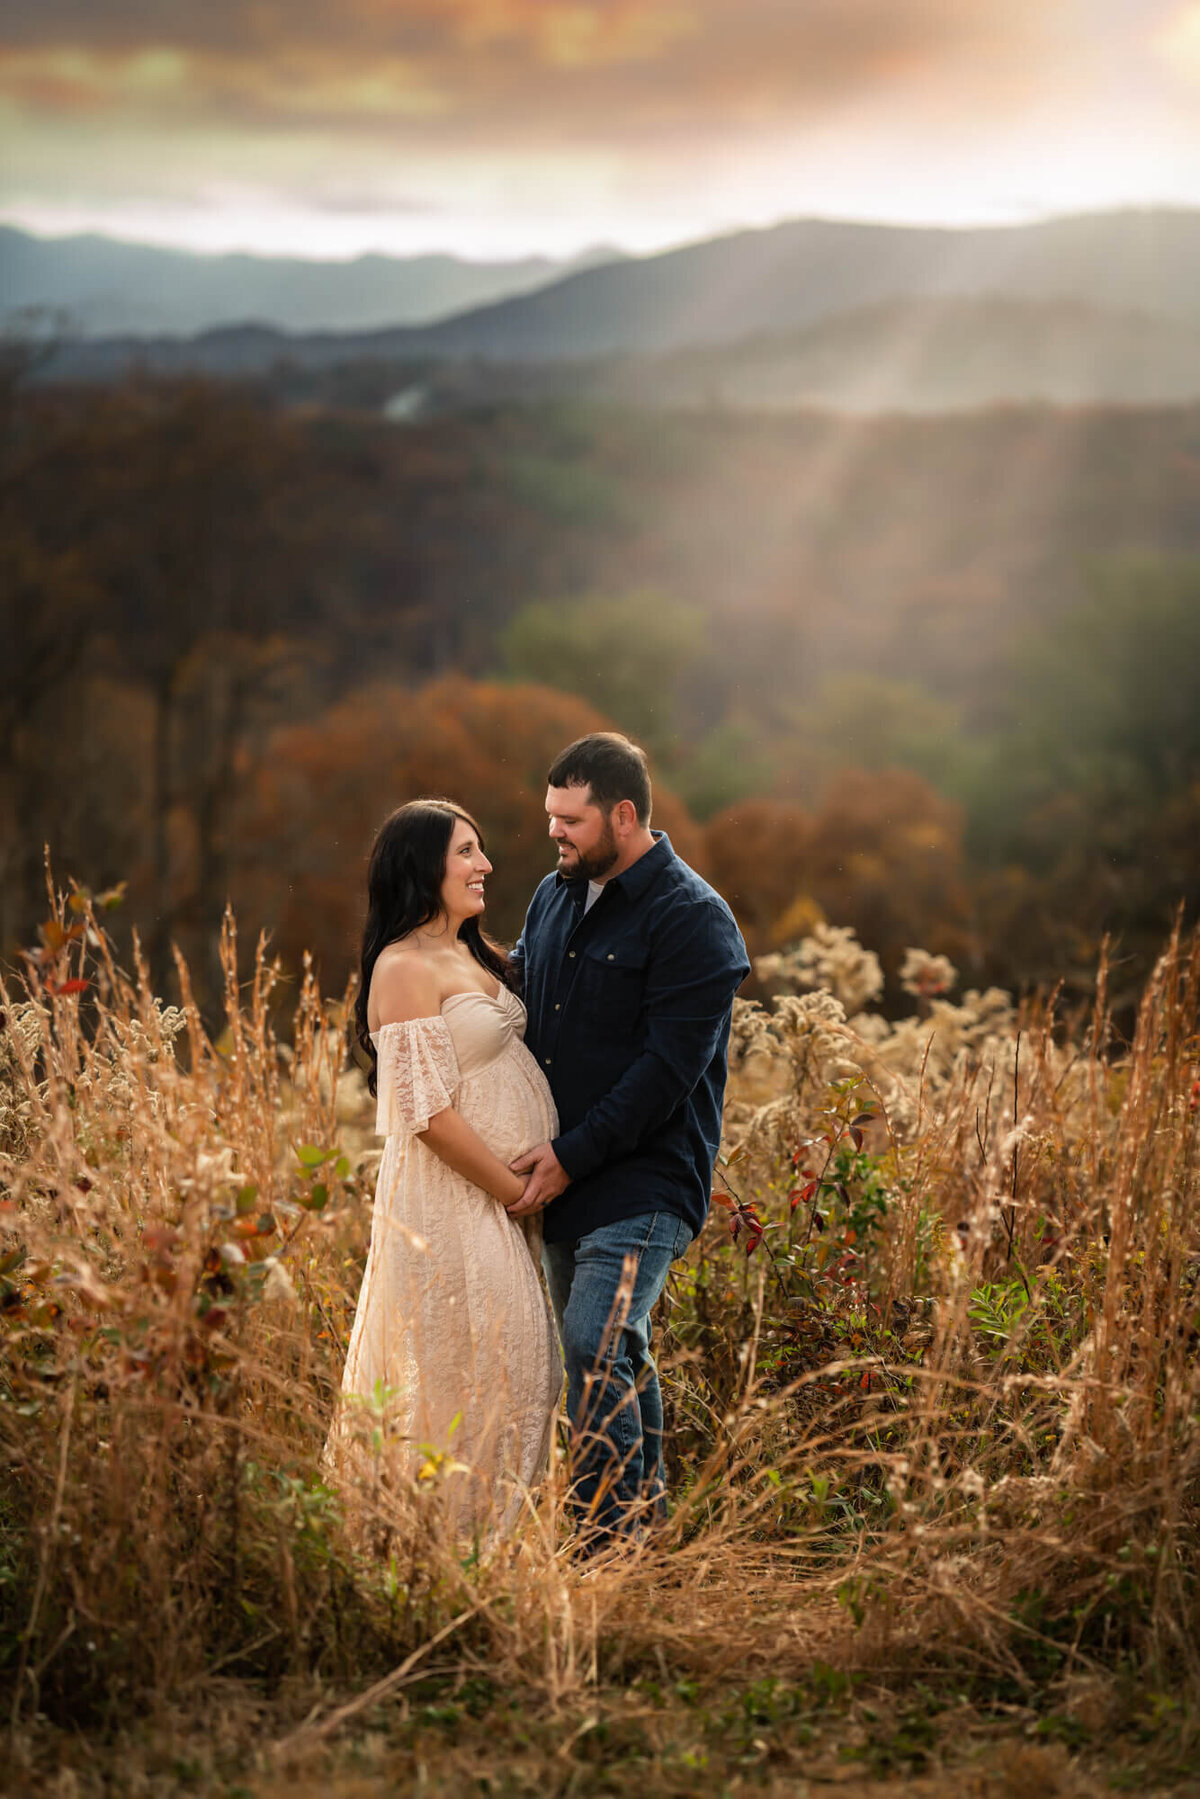 Sun rays pour over an expecting couple as they stand in tall grass